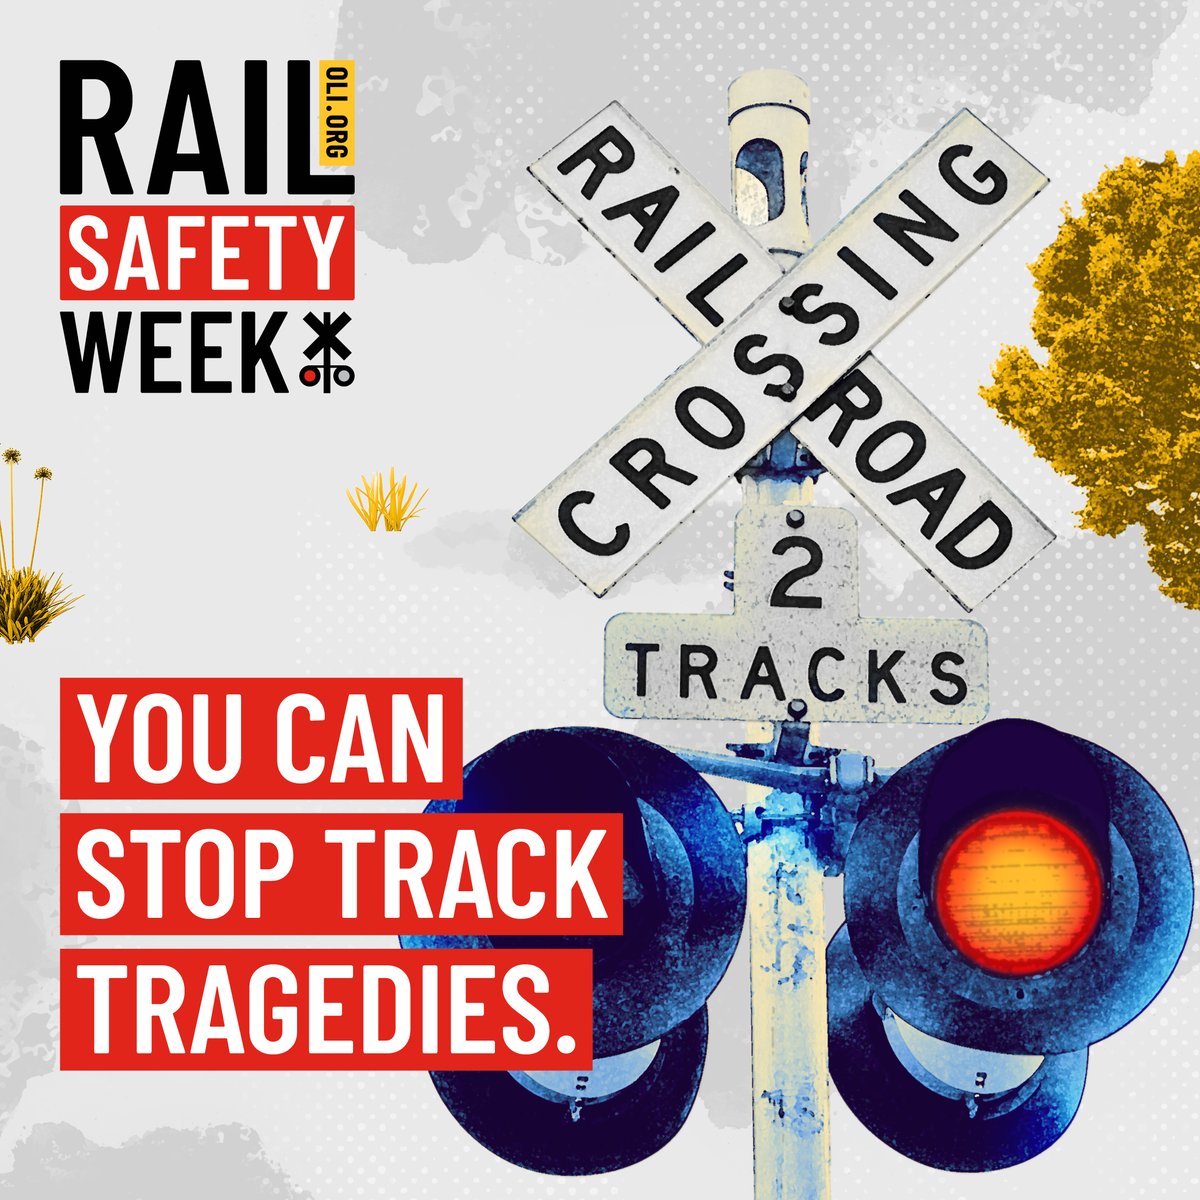 This #RailSafetyWeek, CSX is proud to again partner with @olinational to raise awareness about safety near railroad tracks. Together we can all help #STOPTrackTragedies! Keep an eye out this week to learn more about how to stay safe around the tracks. bit.ly/44VYeV9…